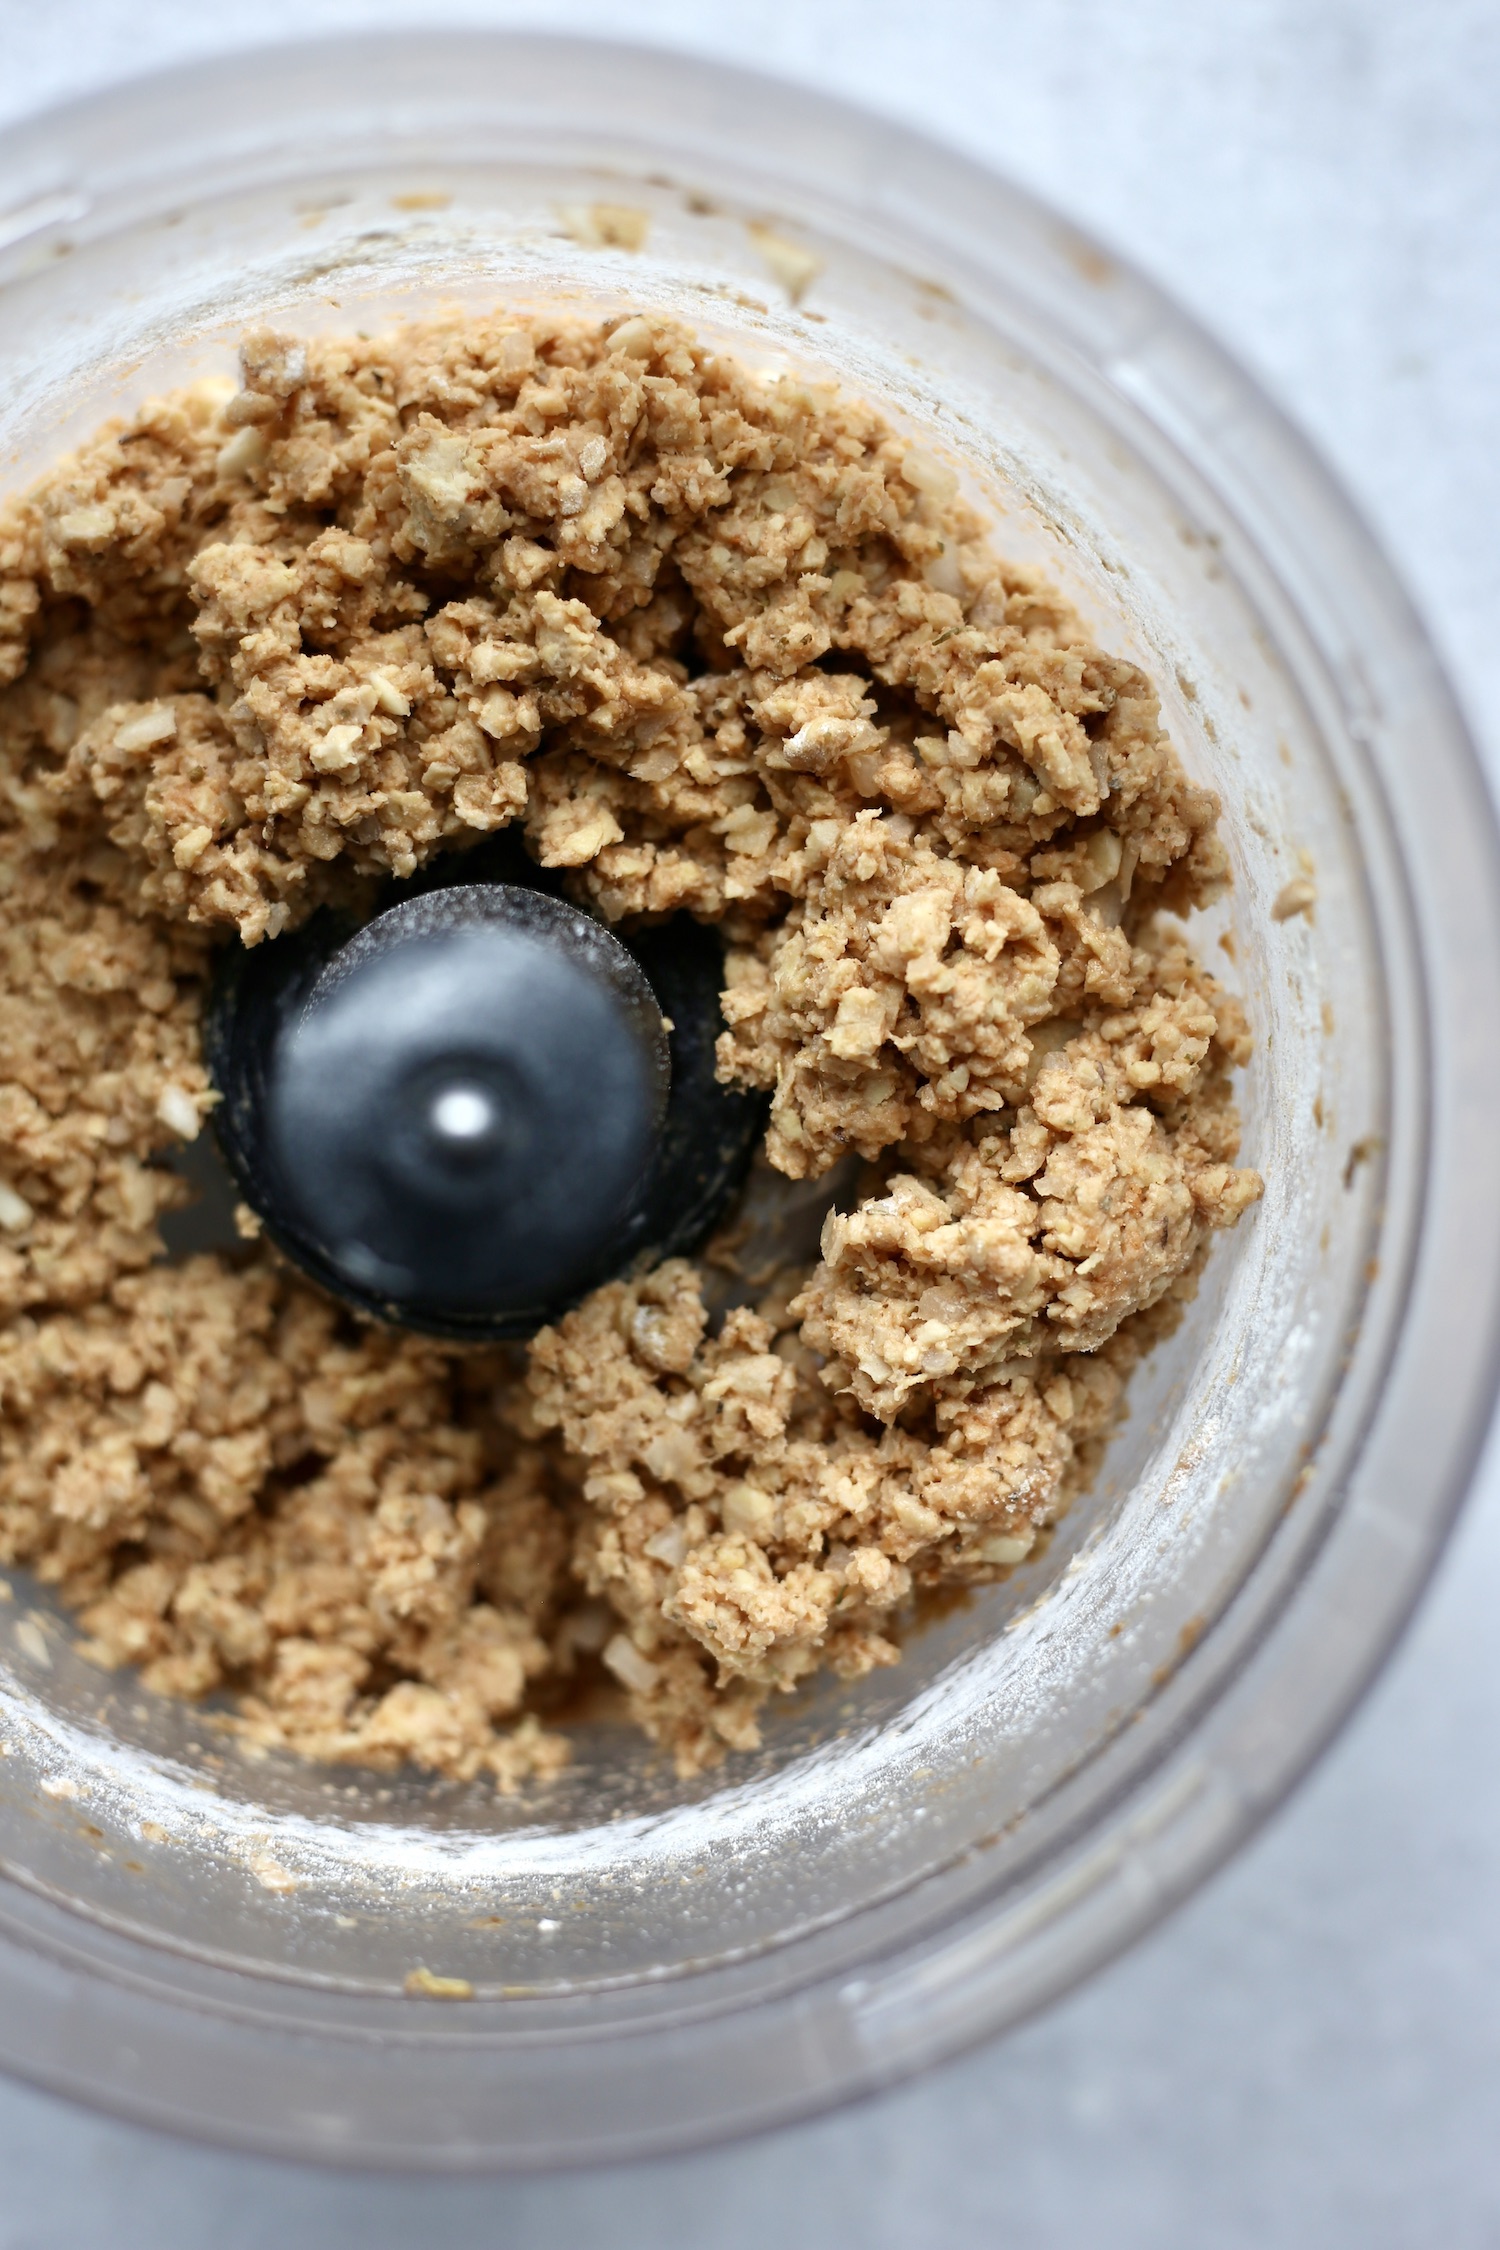 tempeh meatball mixture in a food processor ready to be rolled into meatballs